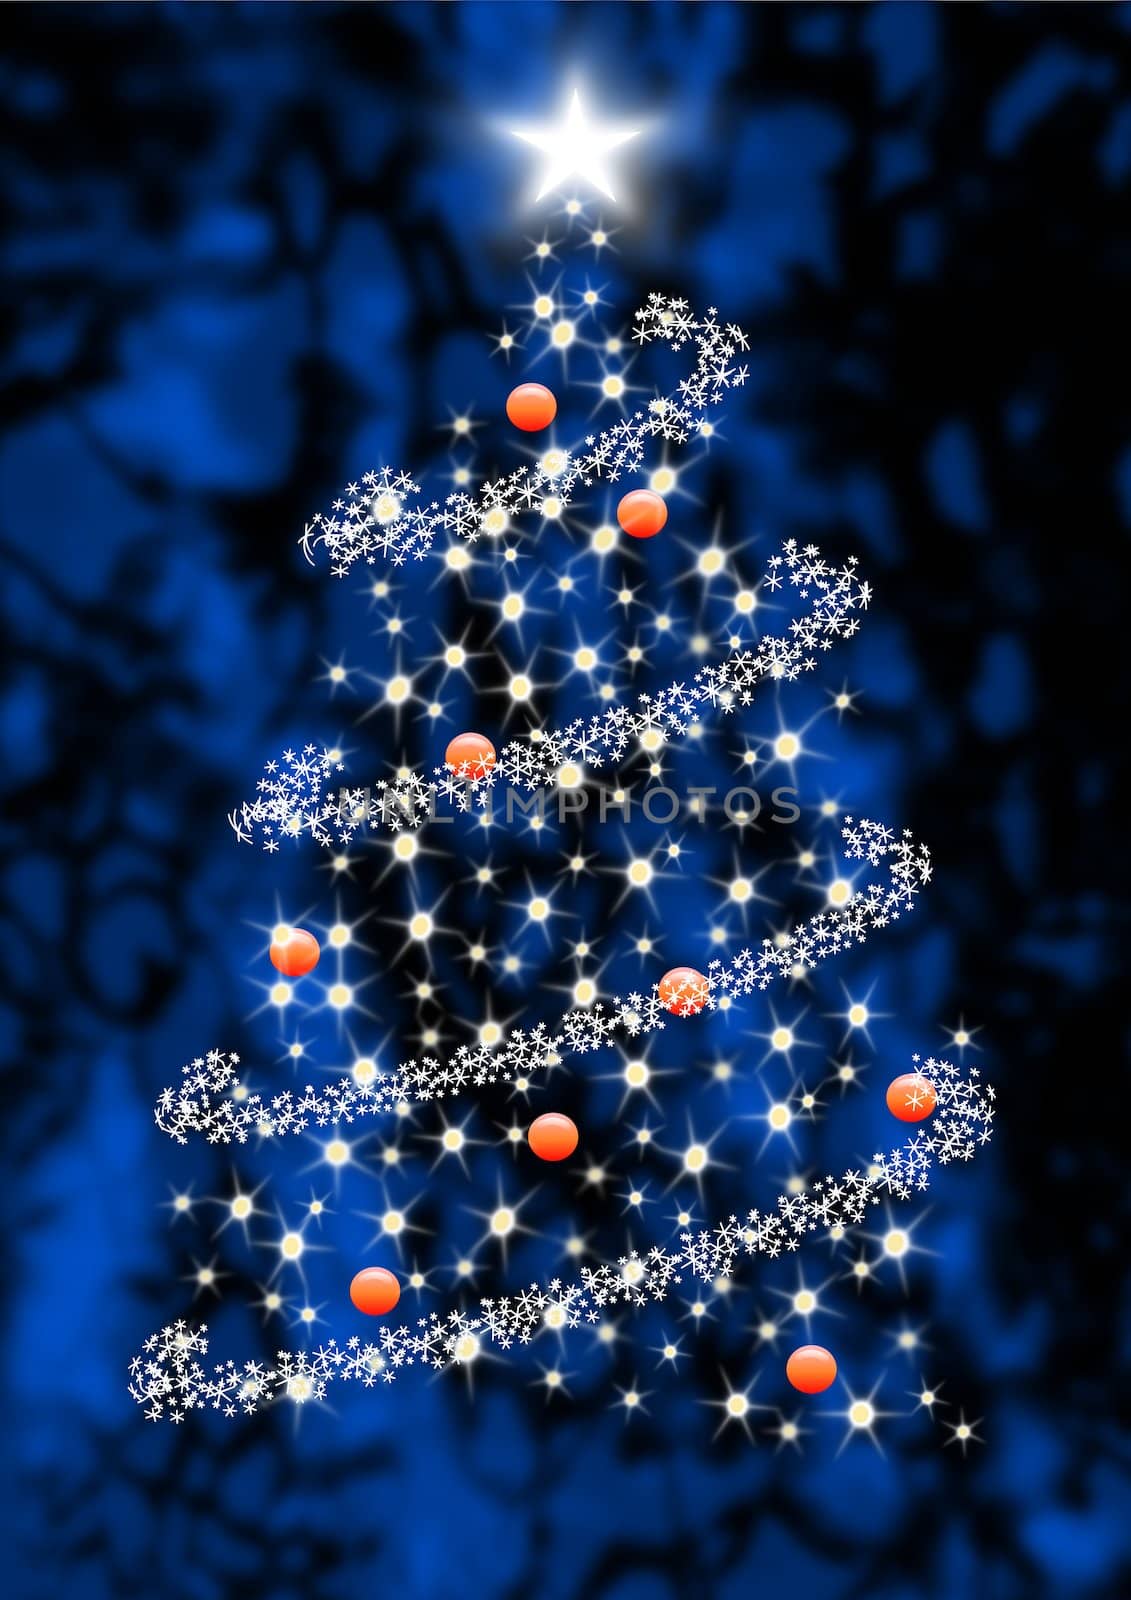 Abstract Christmas tree illustration on an blue background.